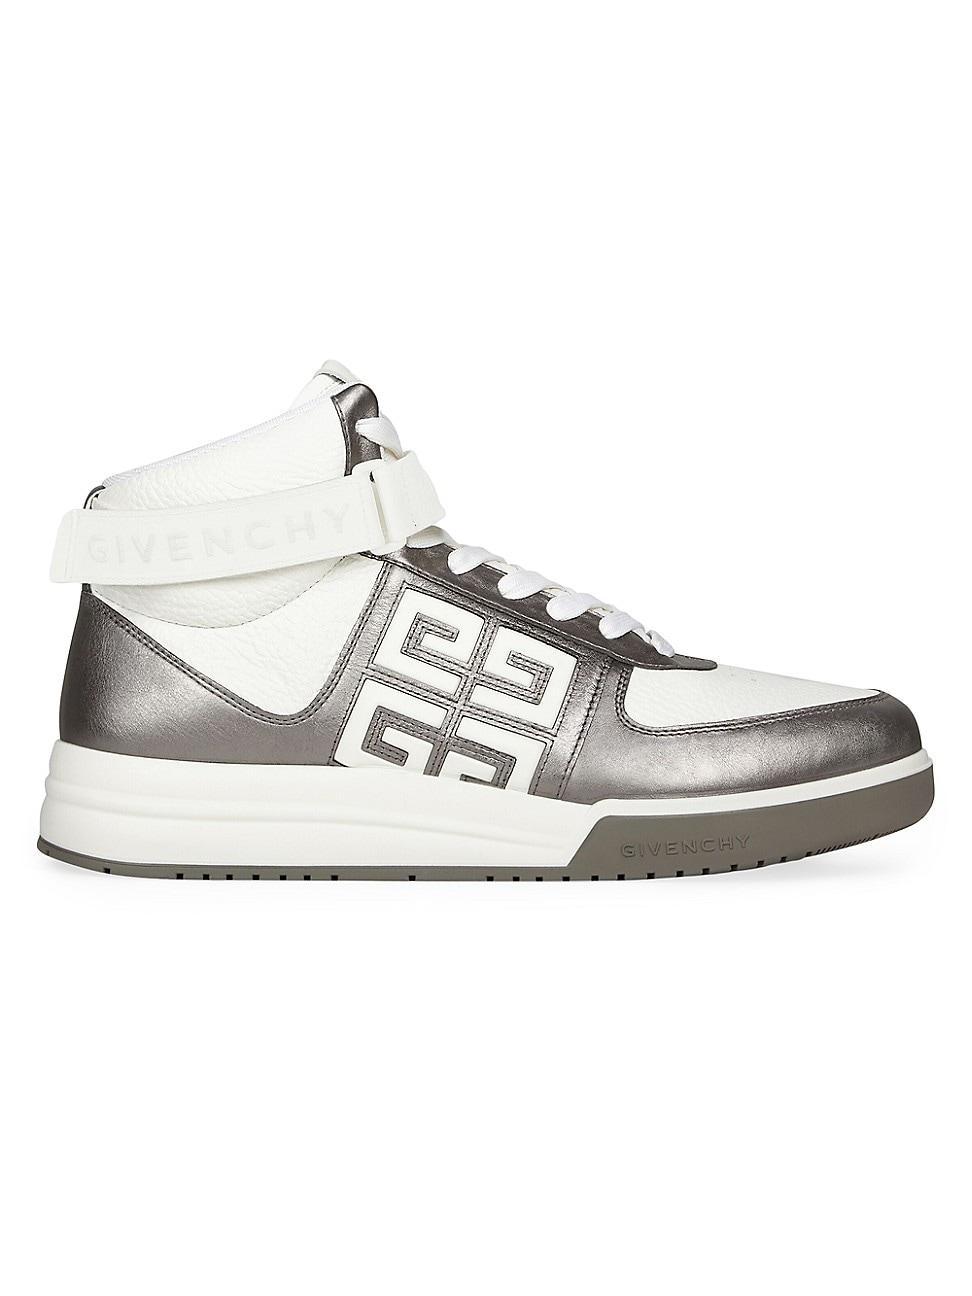 Mens G4 High Top Sneakers In Laminated Leather Product Image